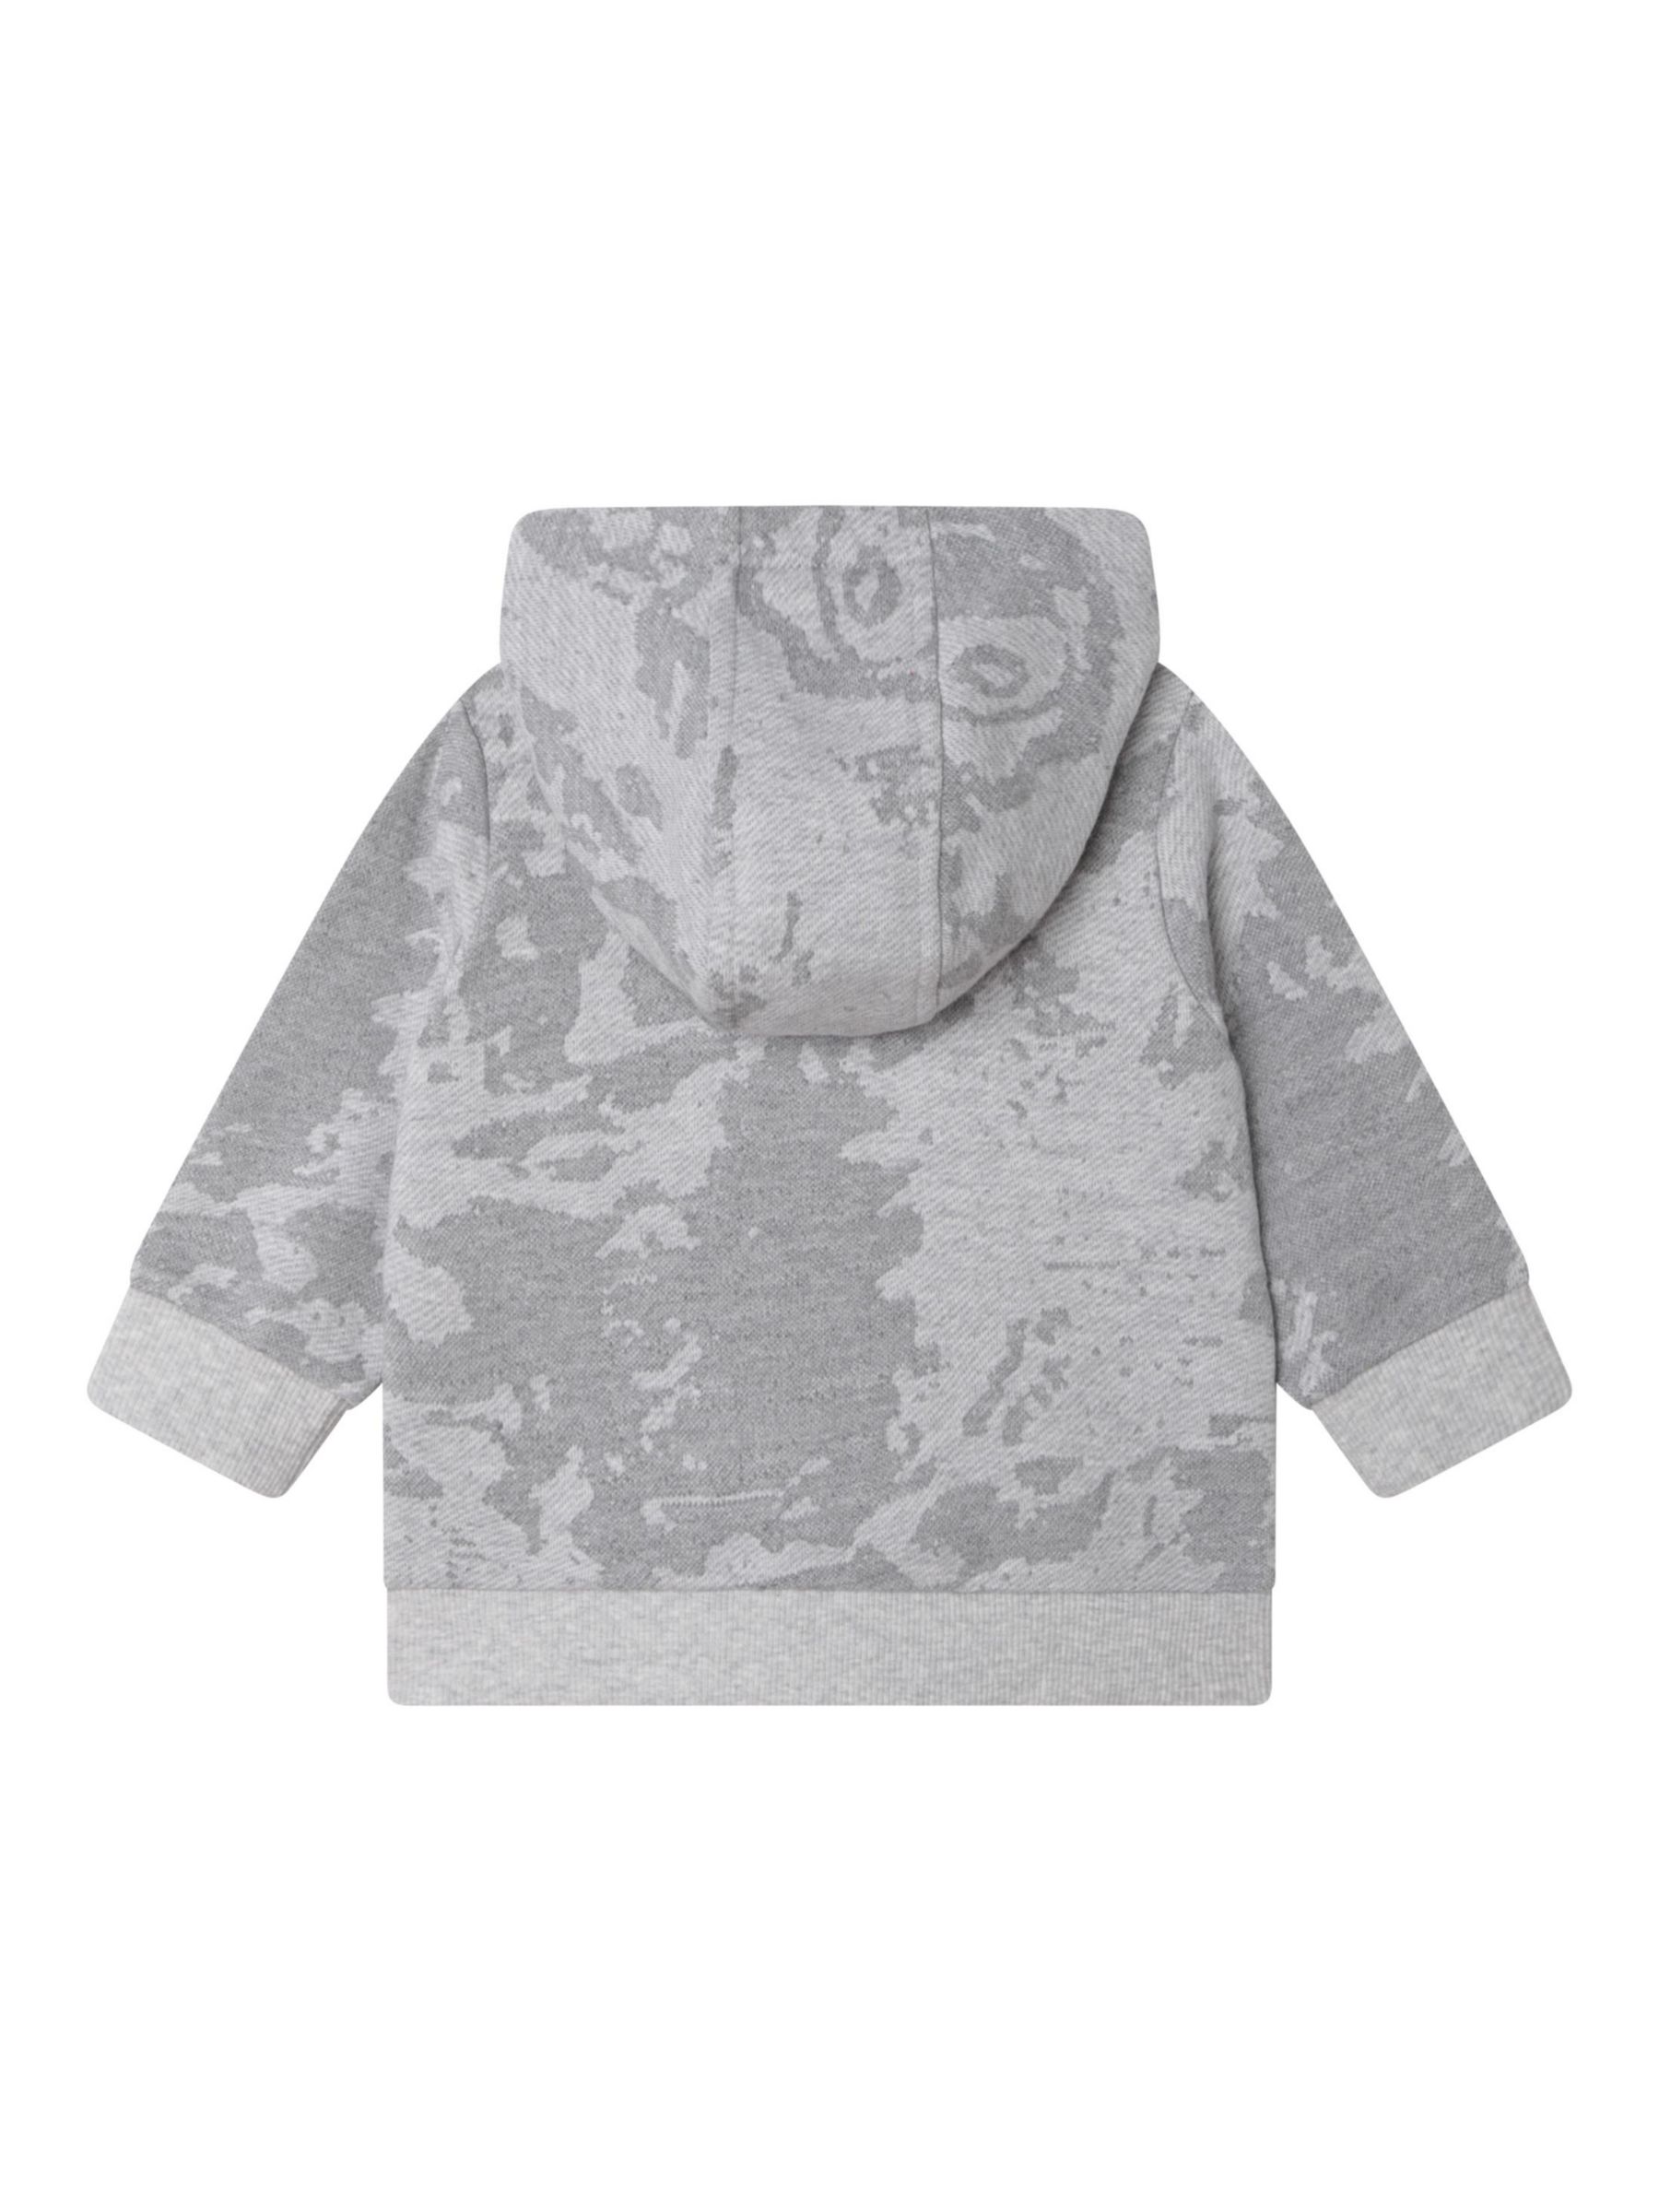 Timberland Baby Camouflage Zipped Hoodie, Light Grey, 9 months